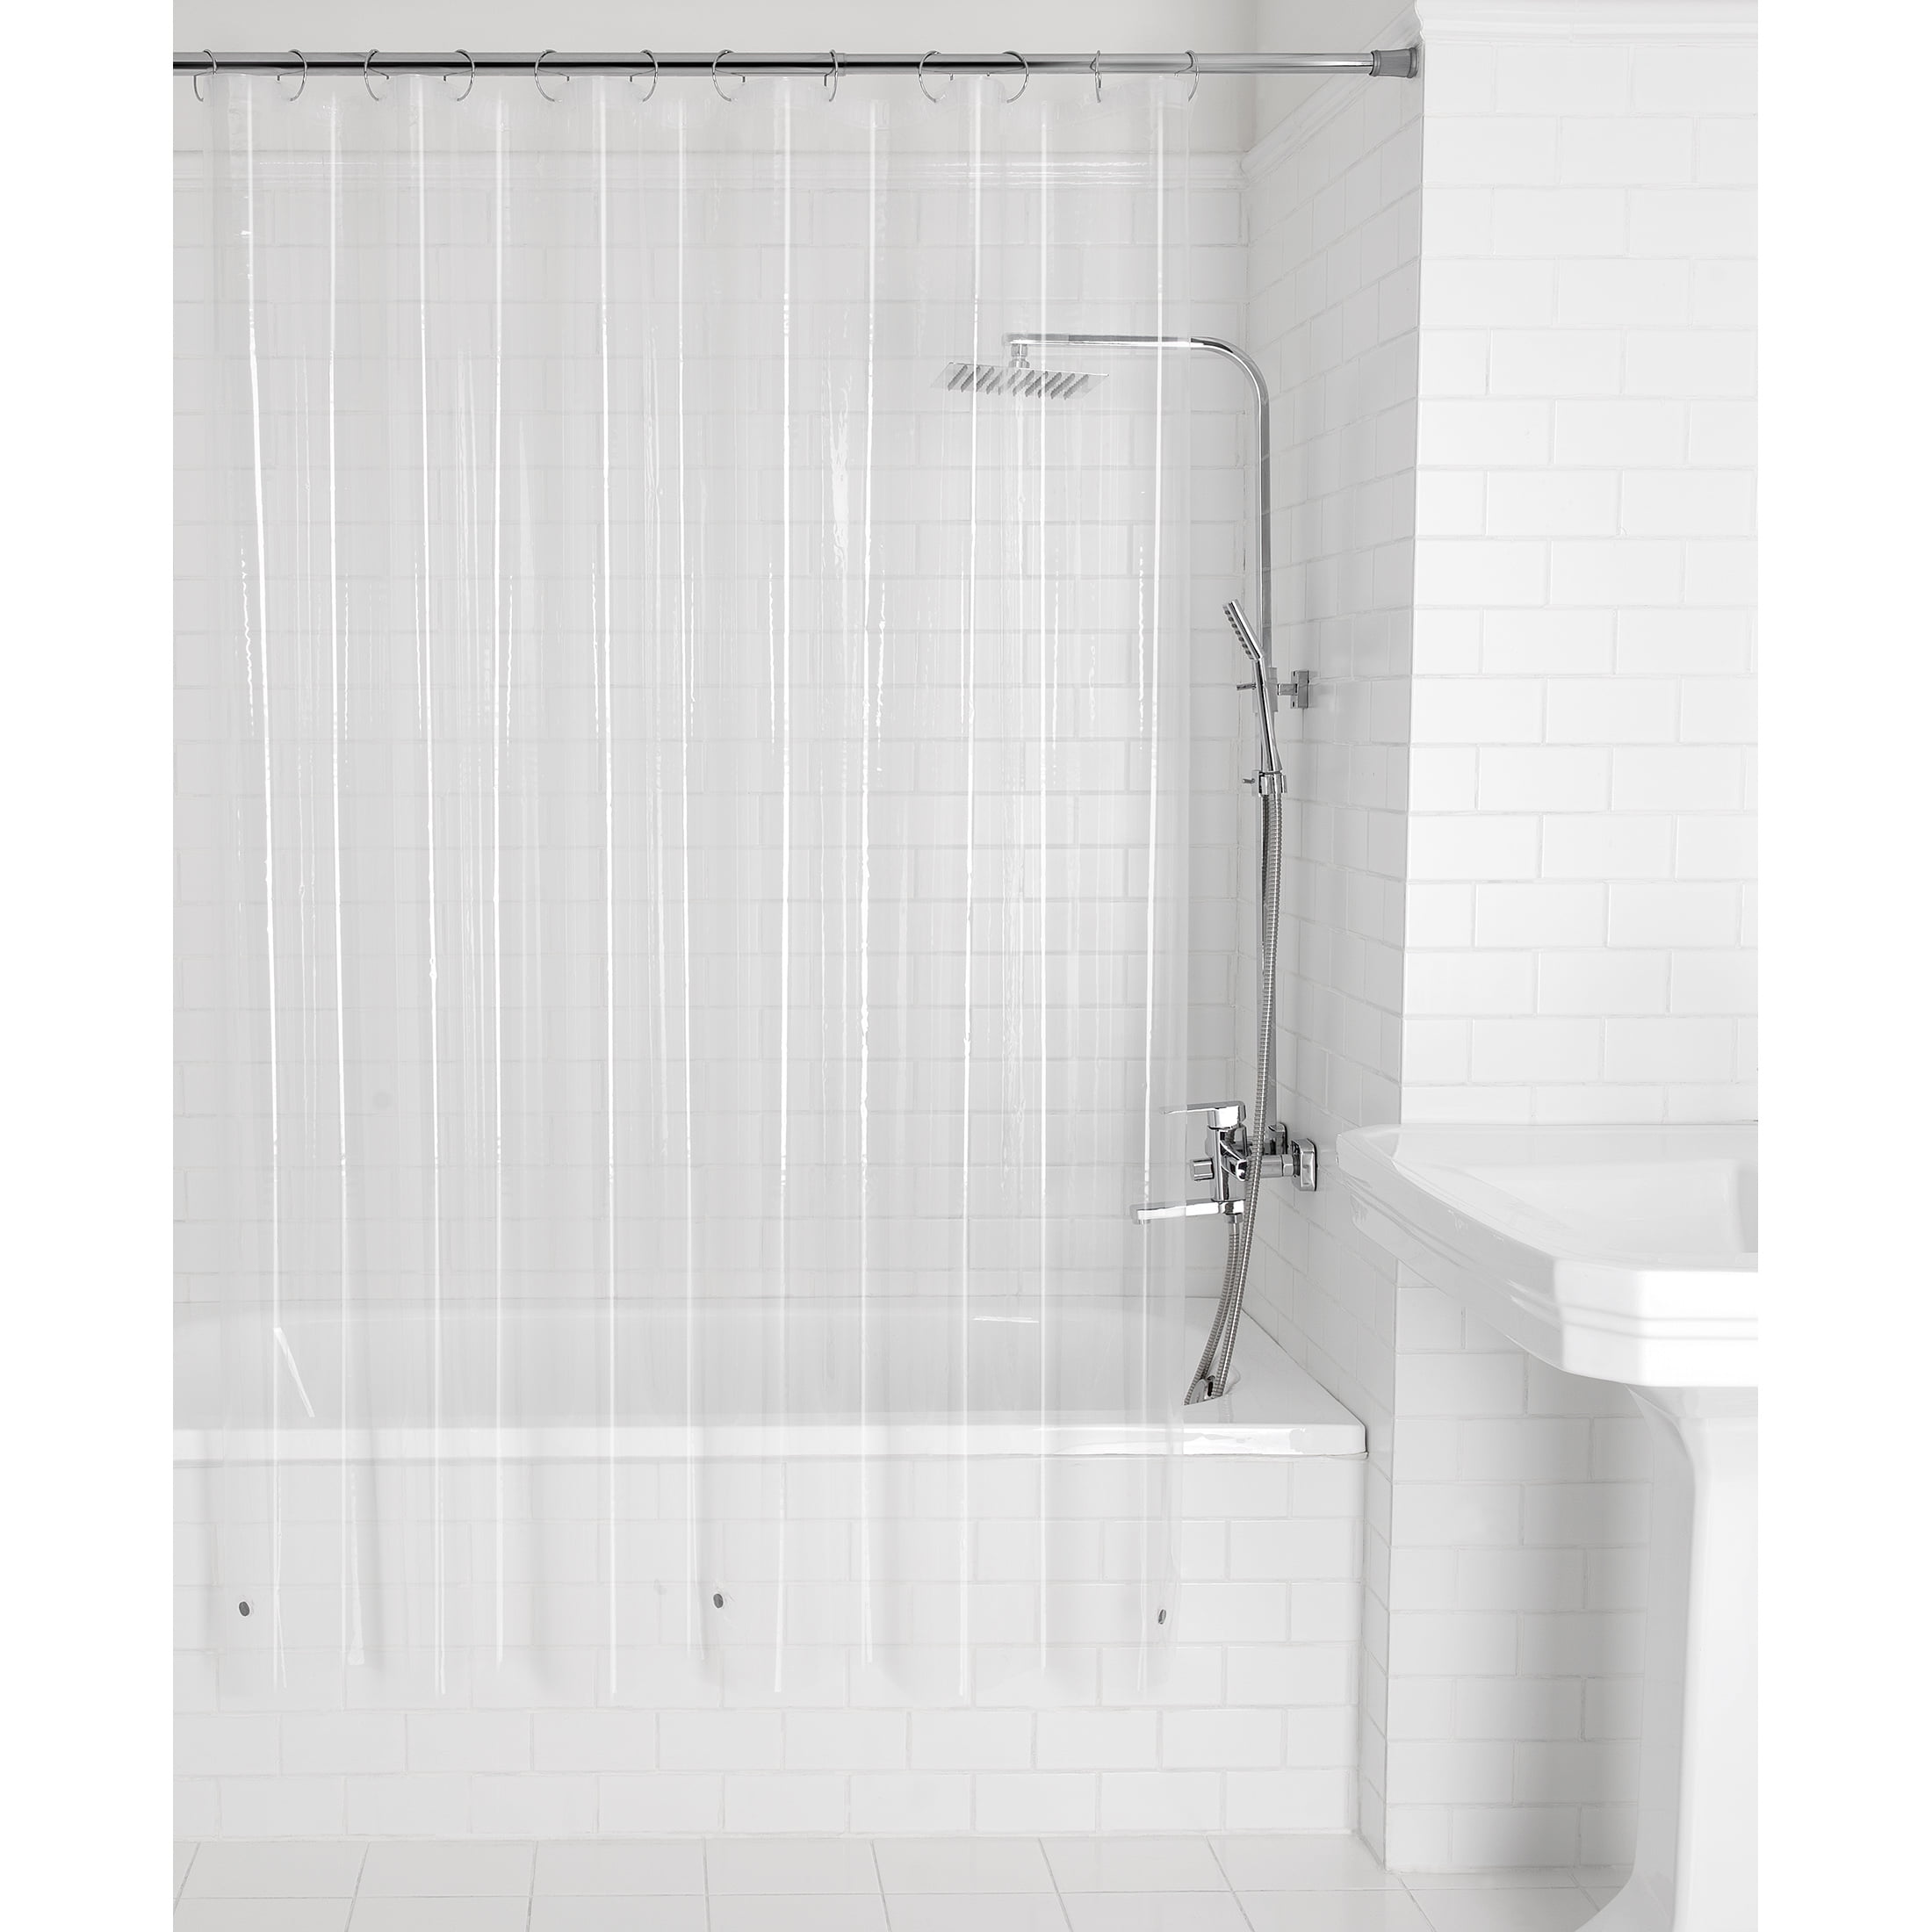 Add a Second Shower Rod for Extra Bathroom Storage  Shower rods, Shower  storage, Dollar store organizing